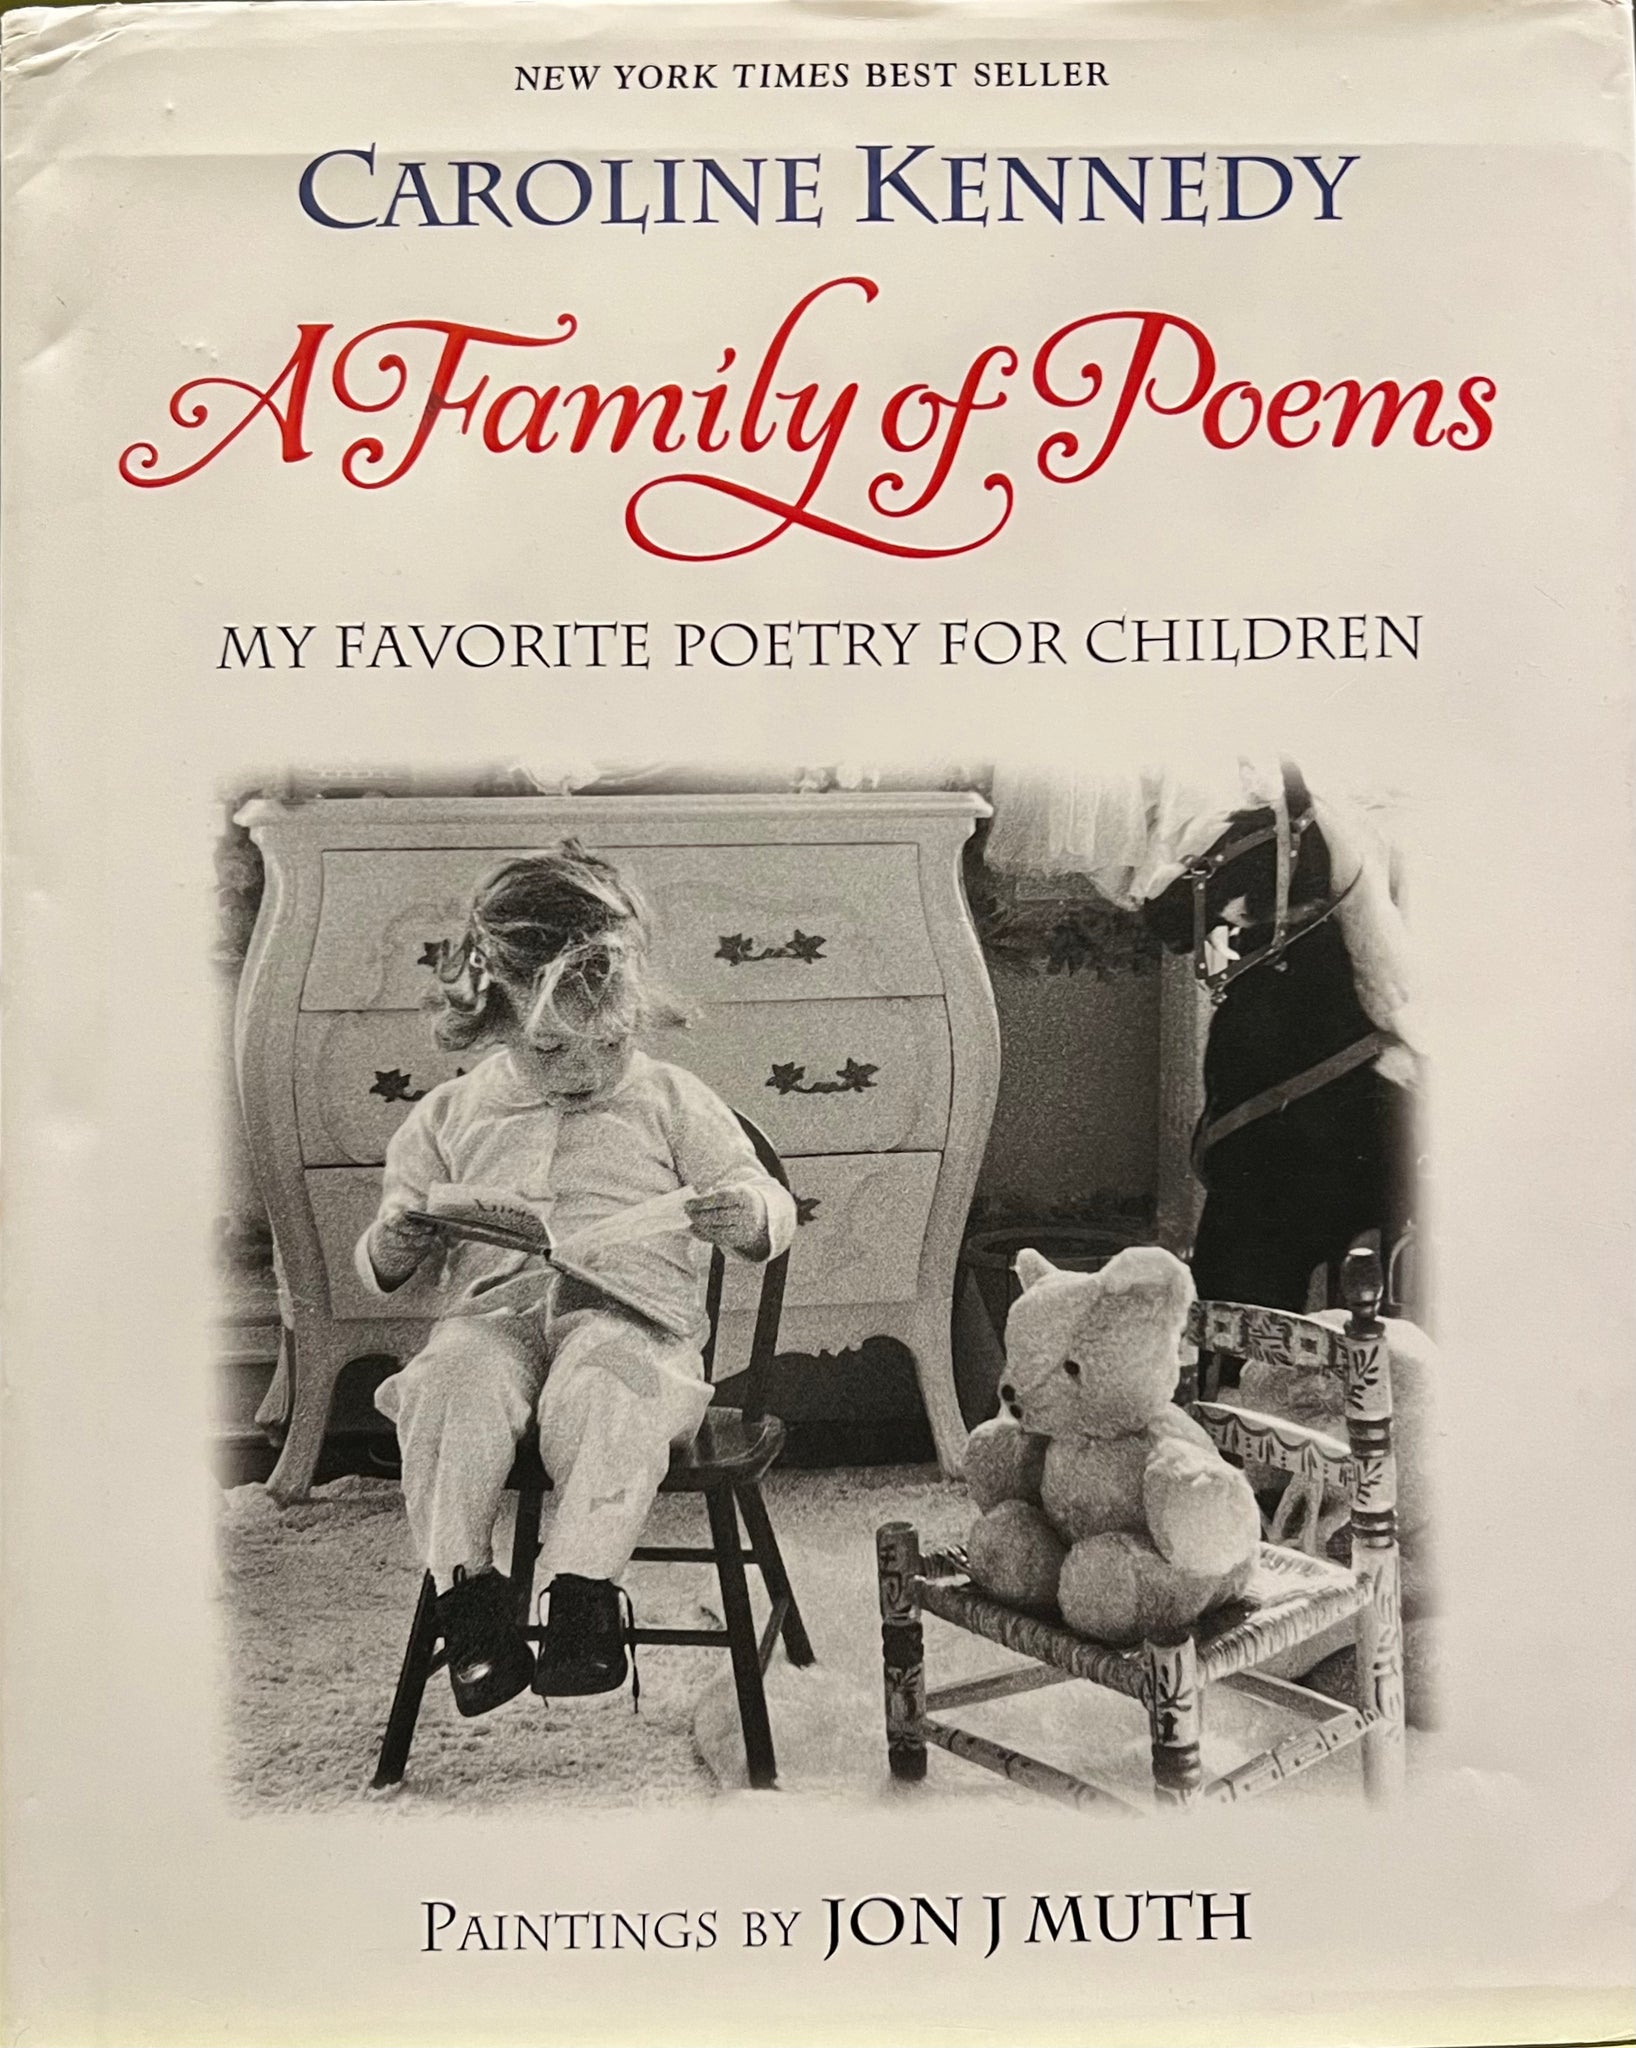 A Family of Poems: My Favorite Poetry for Children, Caroline Kennedy